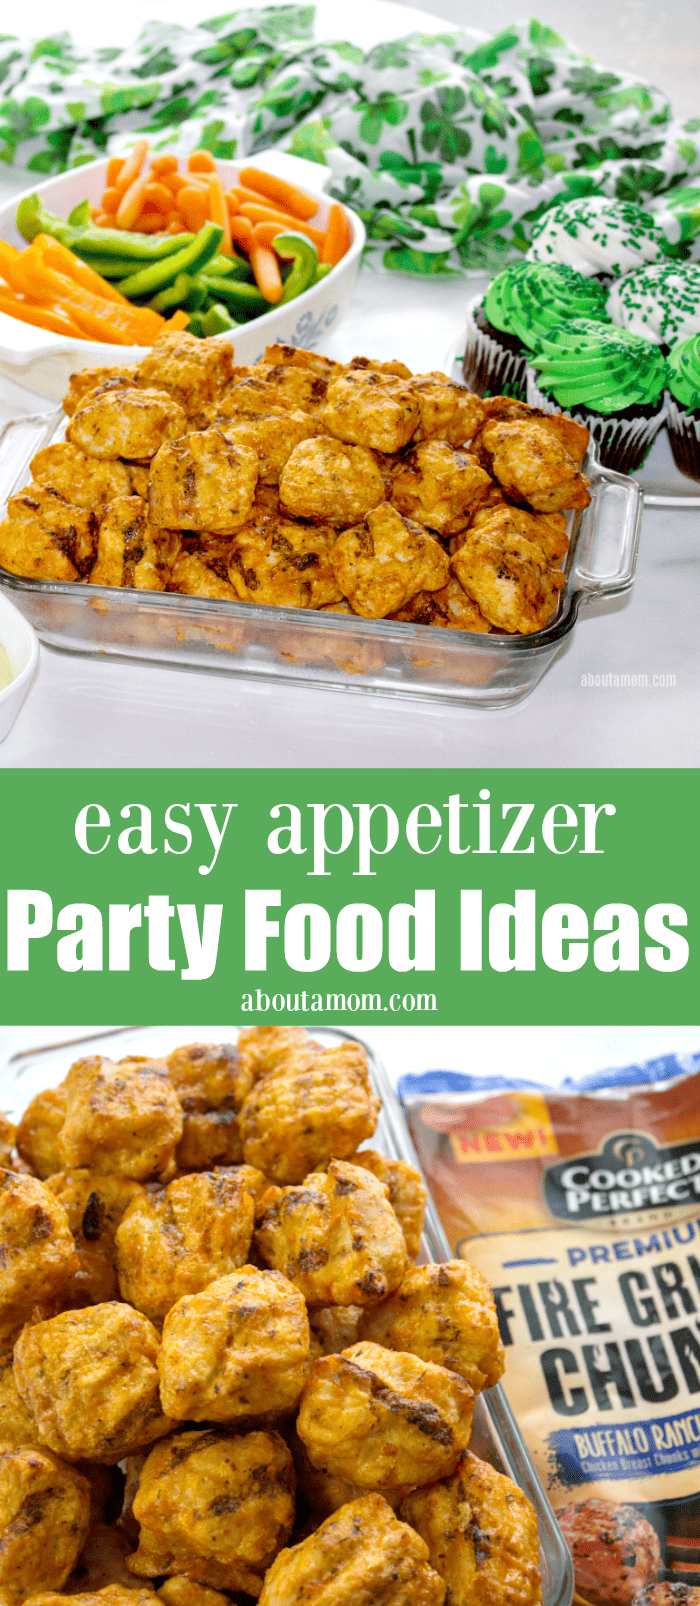 Easy appetizer party food ideas for your next get-together. Entertain with ease and enjoy spending time with your guests.